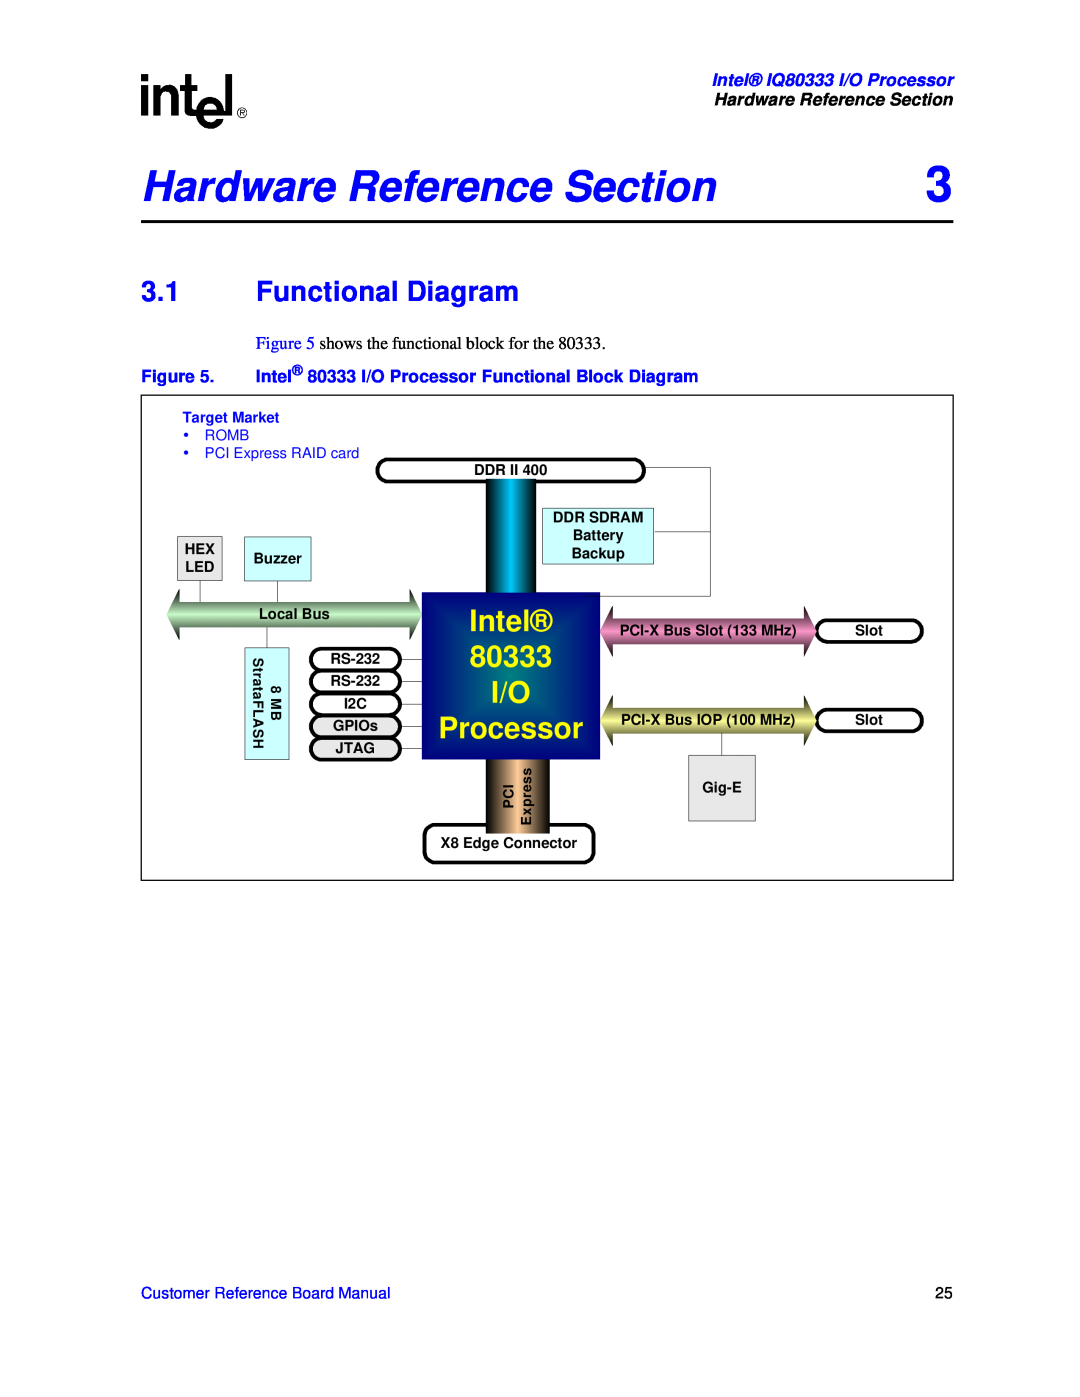 Intel manual Hardware Reference Section, 3.1Functional Diagram, Intel IQ80333 I/O Processor, Target Market, Romb 